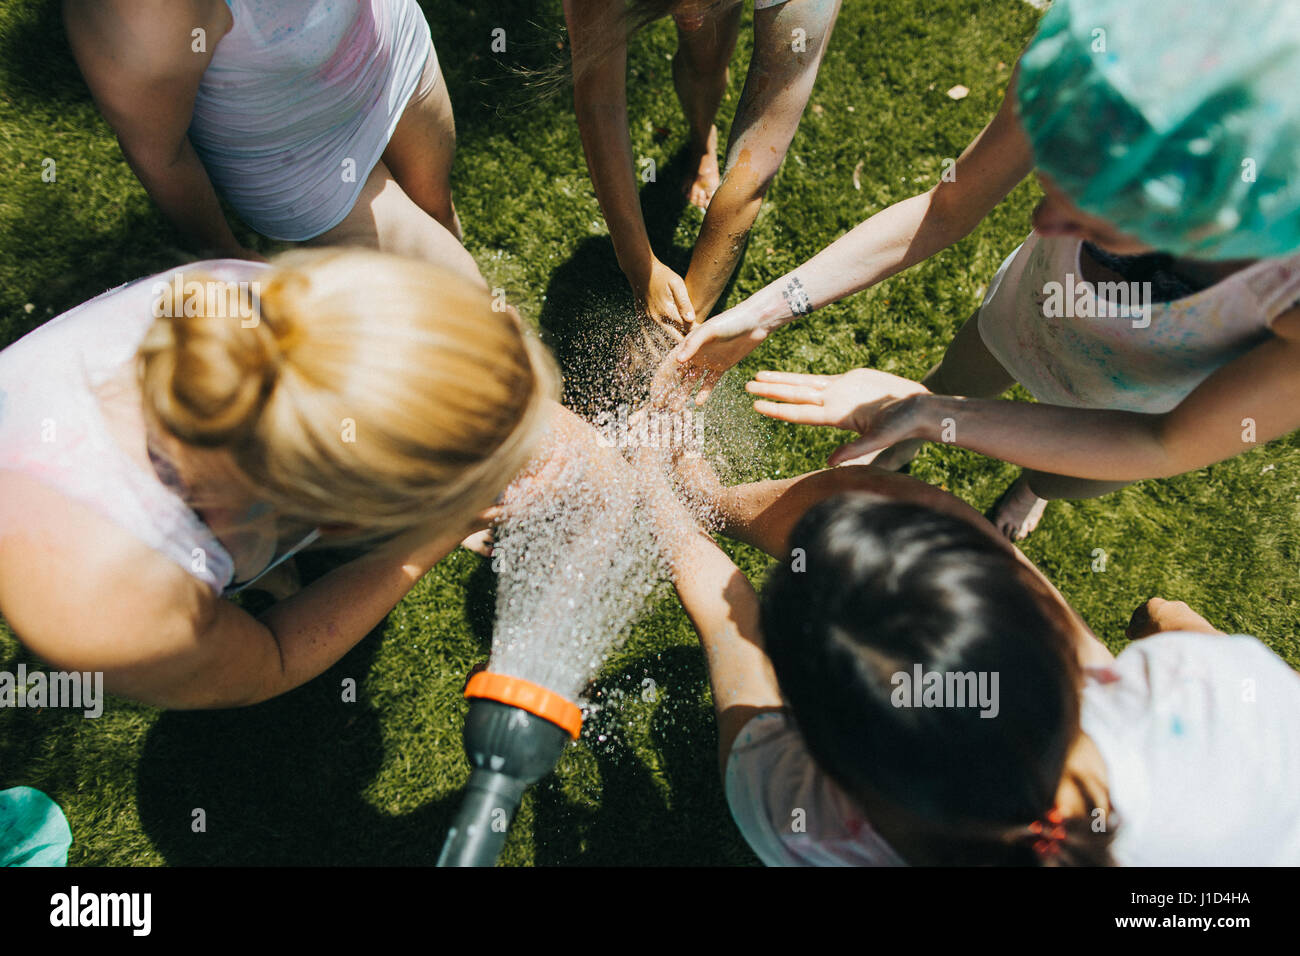 young women washing their hands in the garden on a hot summers day Stock Photo